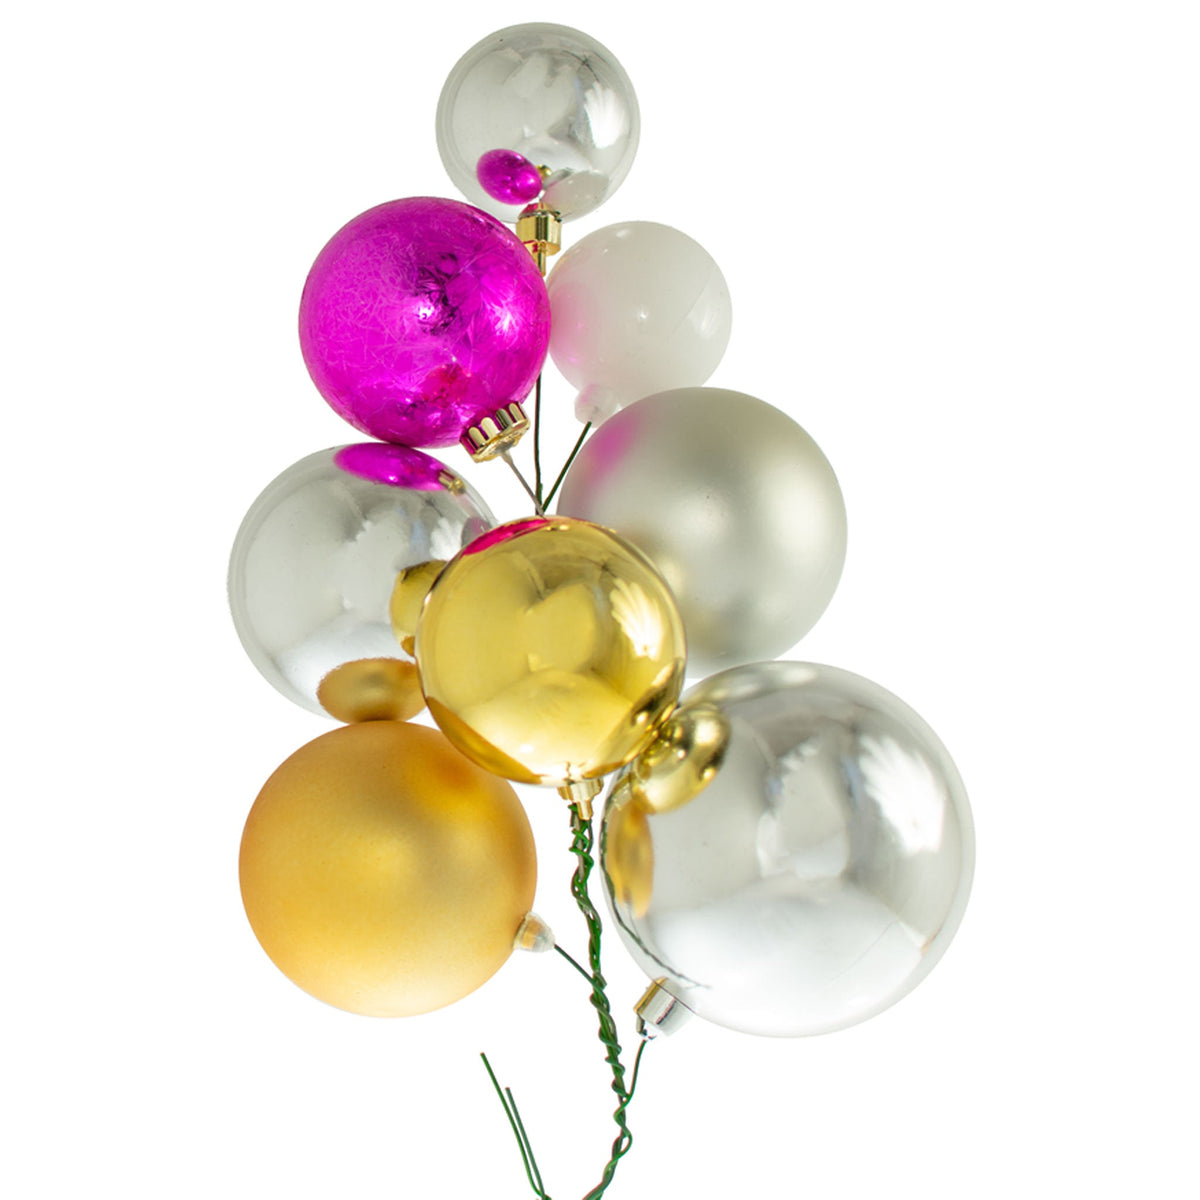 Colors include:  1 - Shiny Gold Ball Ornament (70MM) 3 - Shiny Silver Ball Ornaments (100MM, 80MM, 60MM) 1 - Matte Gold Ball Ornament (80MM) 1 - Matte Silver Ball Ornaments (80MM) 1 - Galvanized Pink Ball Ornament (70MM) 1 - Shiny White Ball Ornament (60MM)